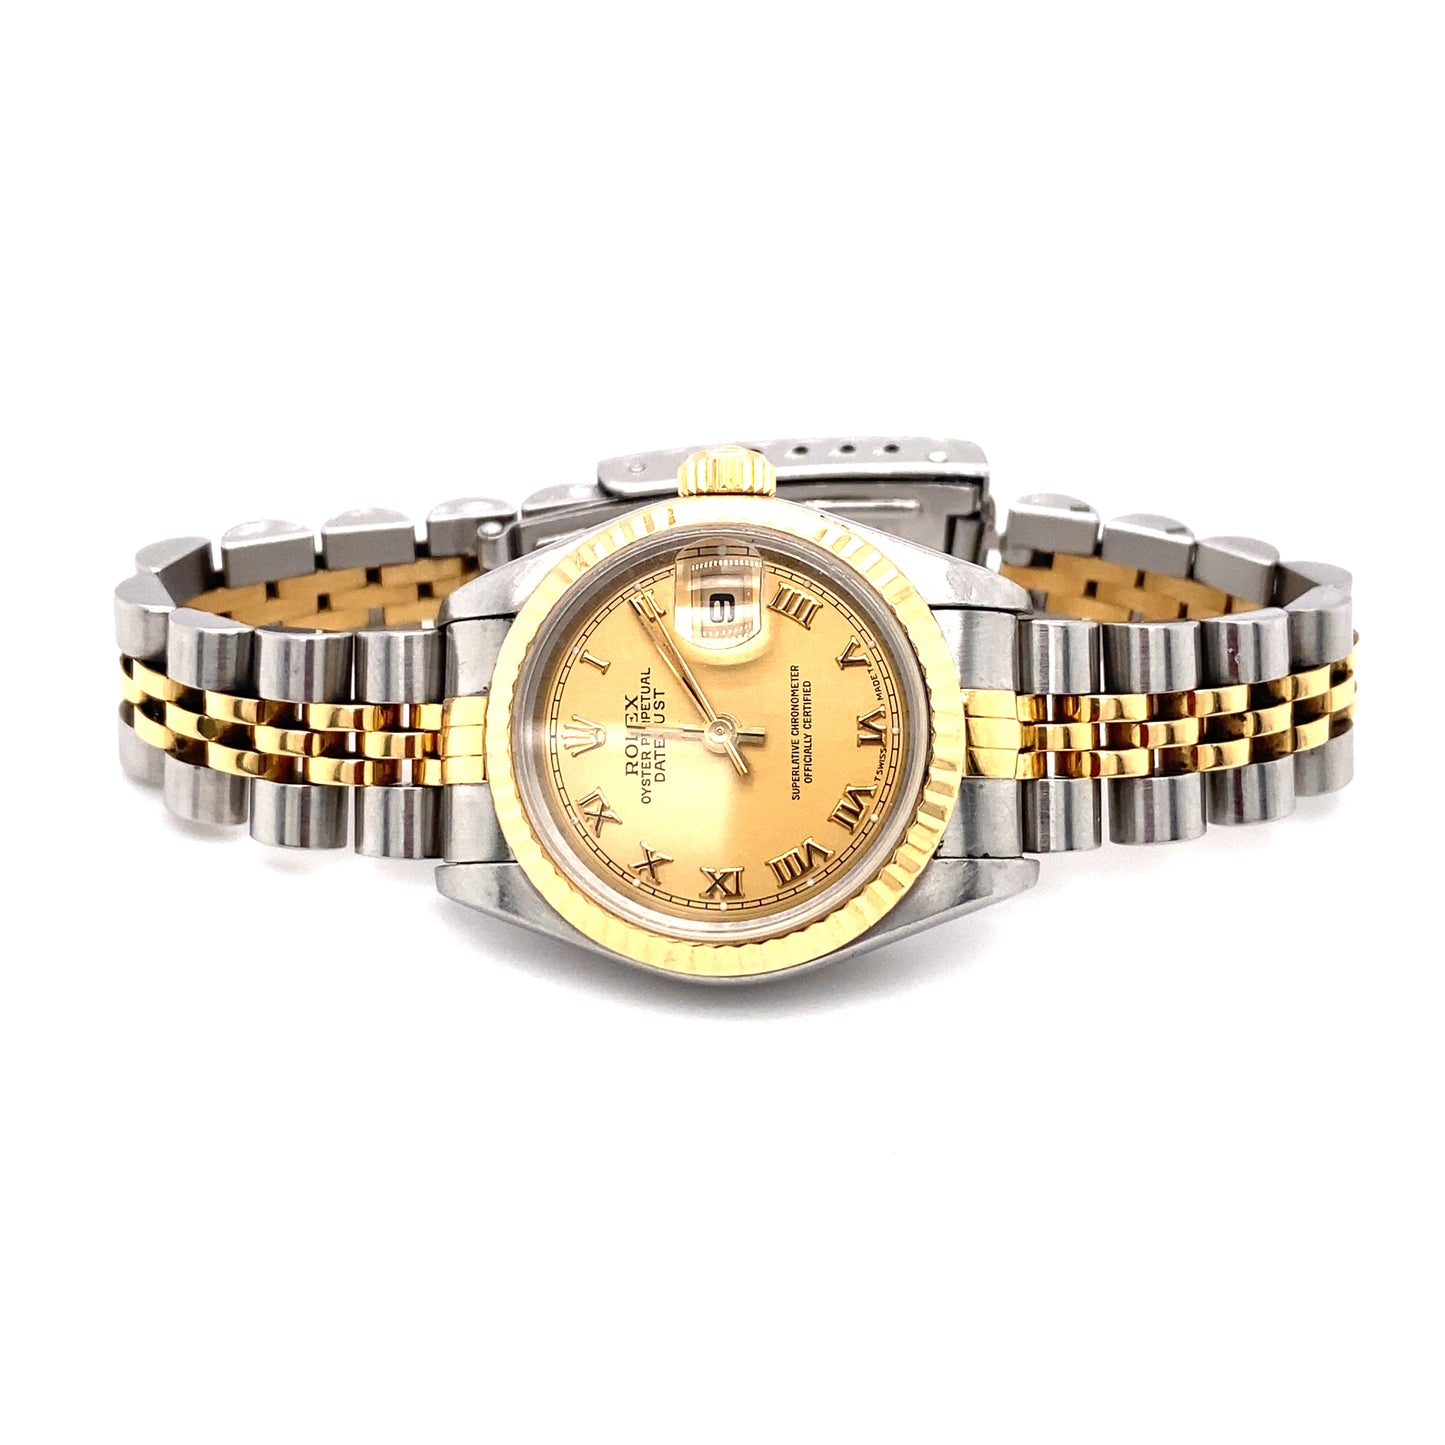 Circa 1995 Rolex Datejust Ladies' Wrist Watch in Stainless Steel and Gold